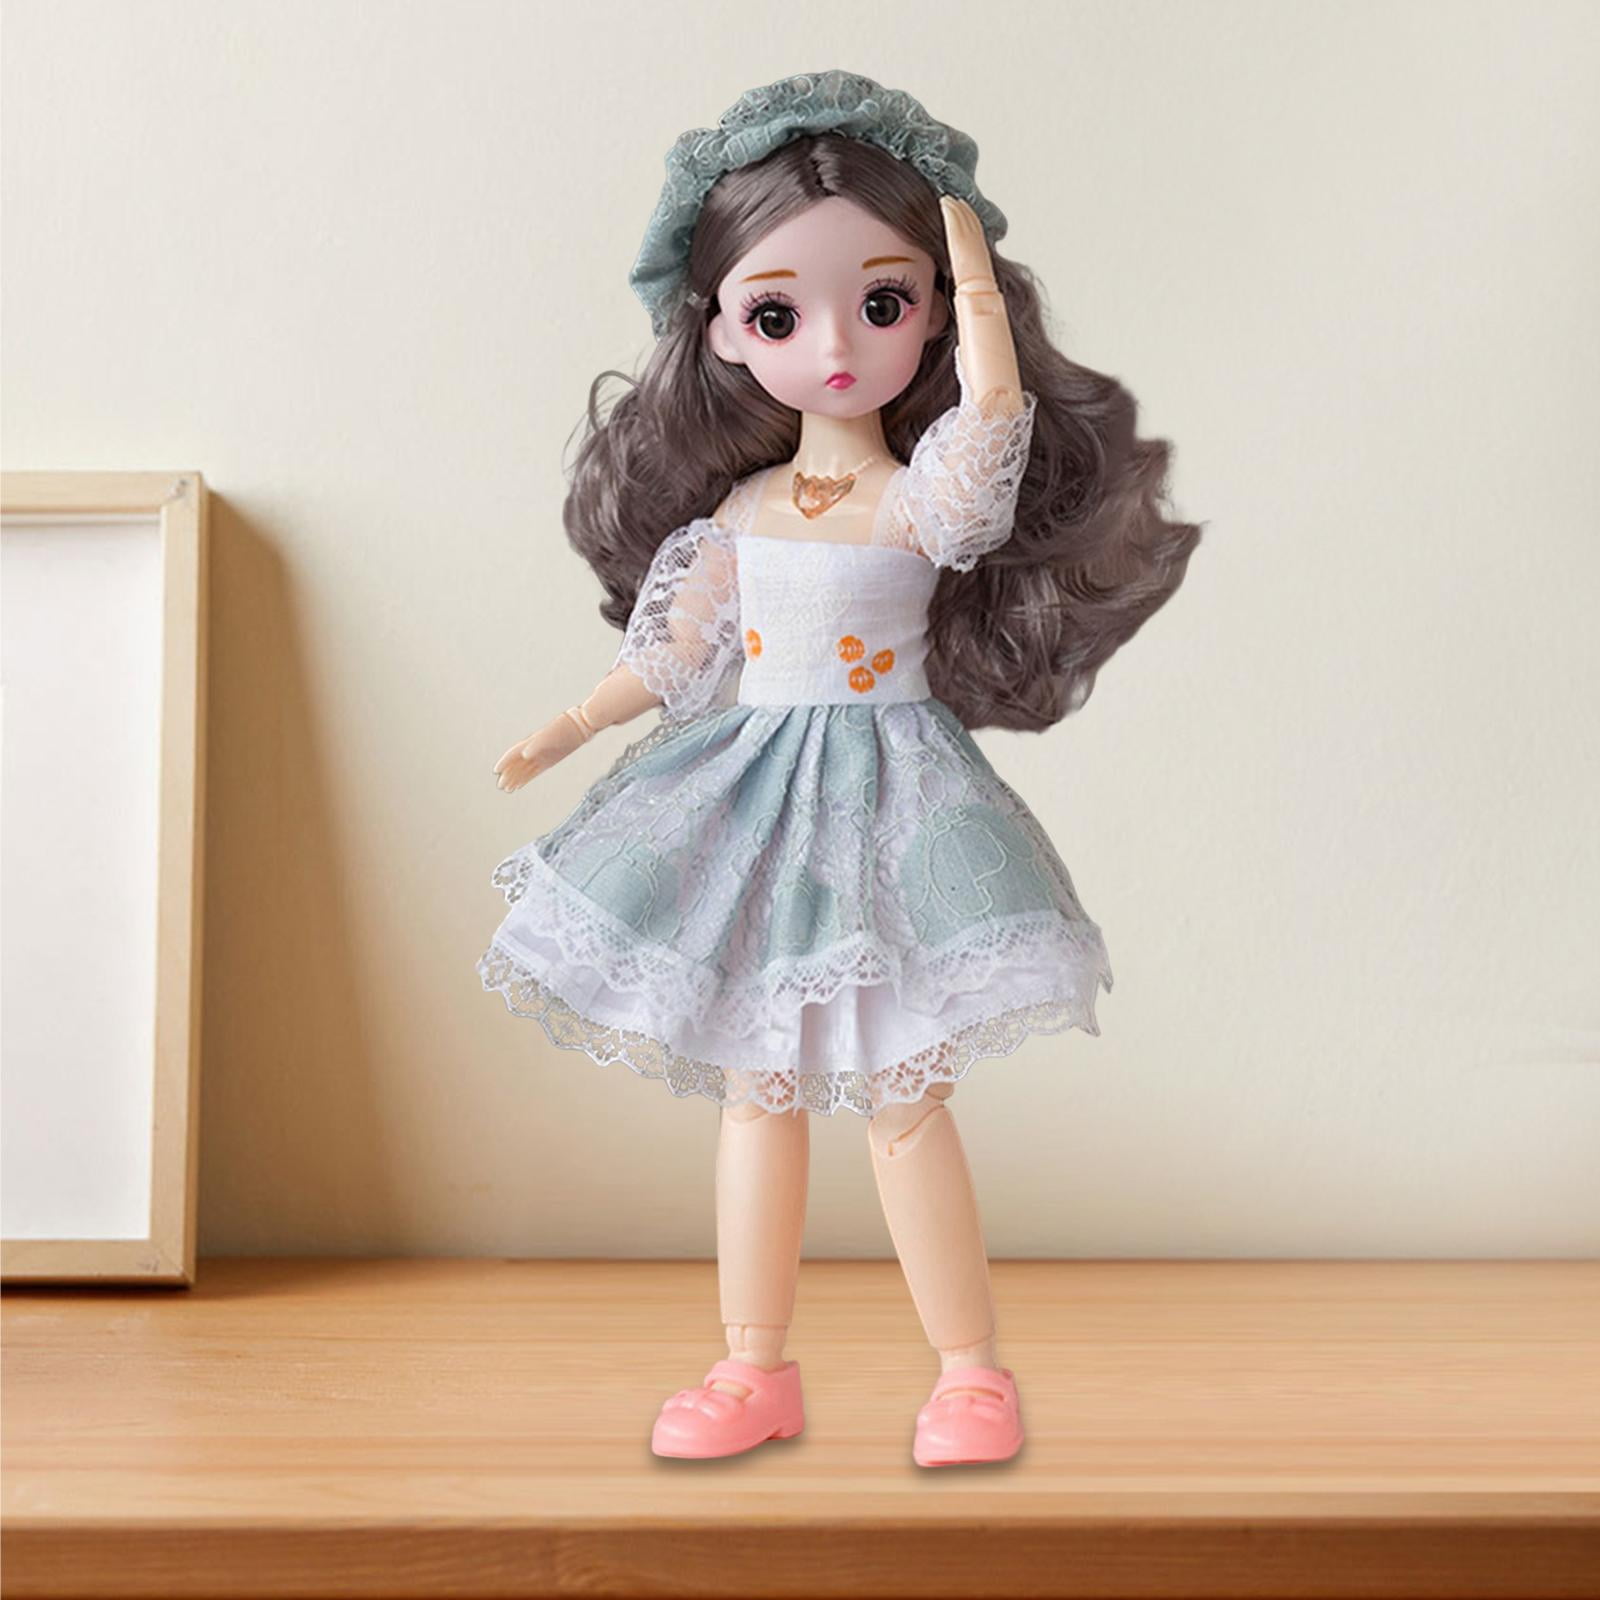 Buy Doll Dress Making Online In India - Etsy India